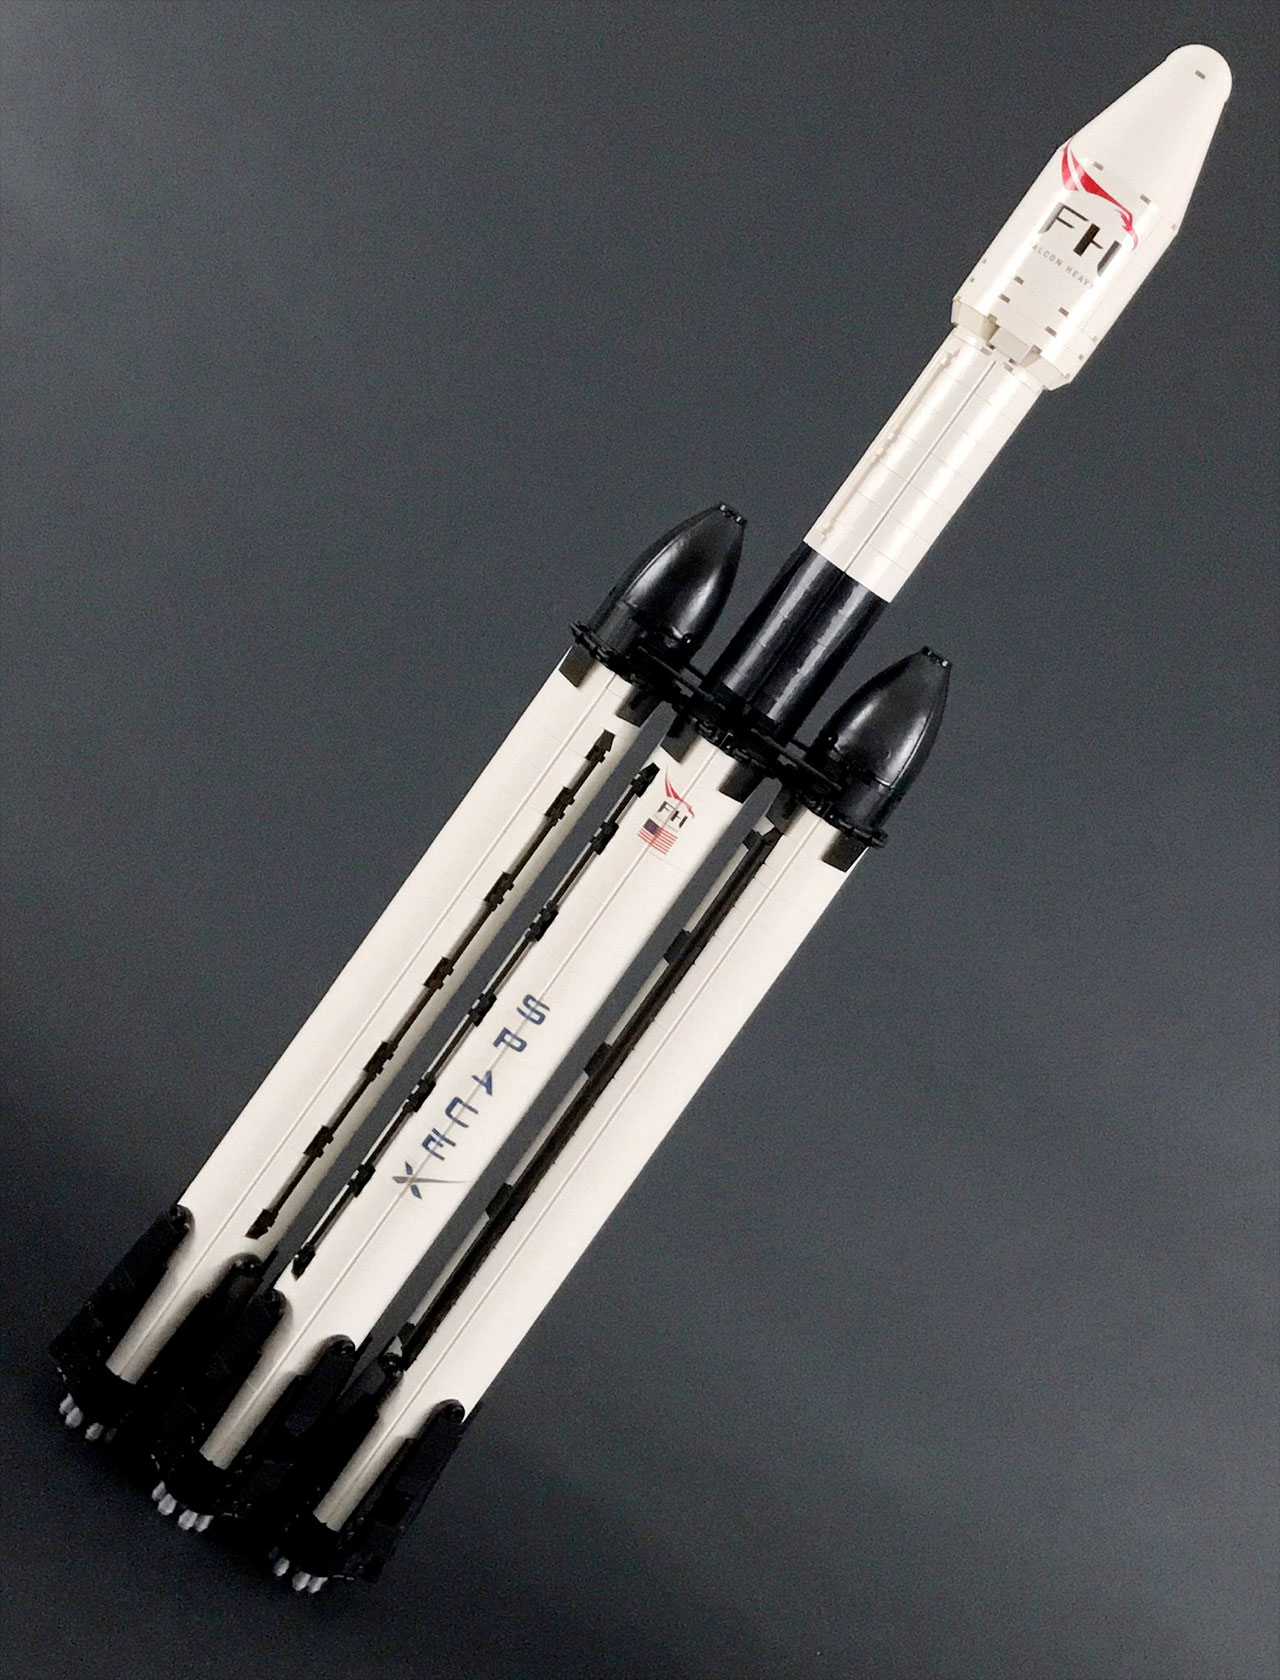 lego spacex rocket